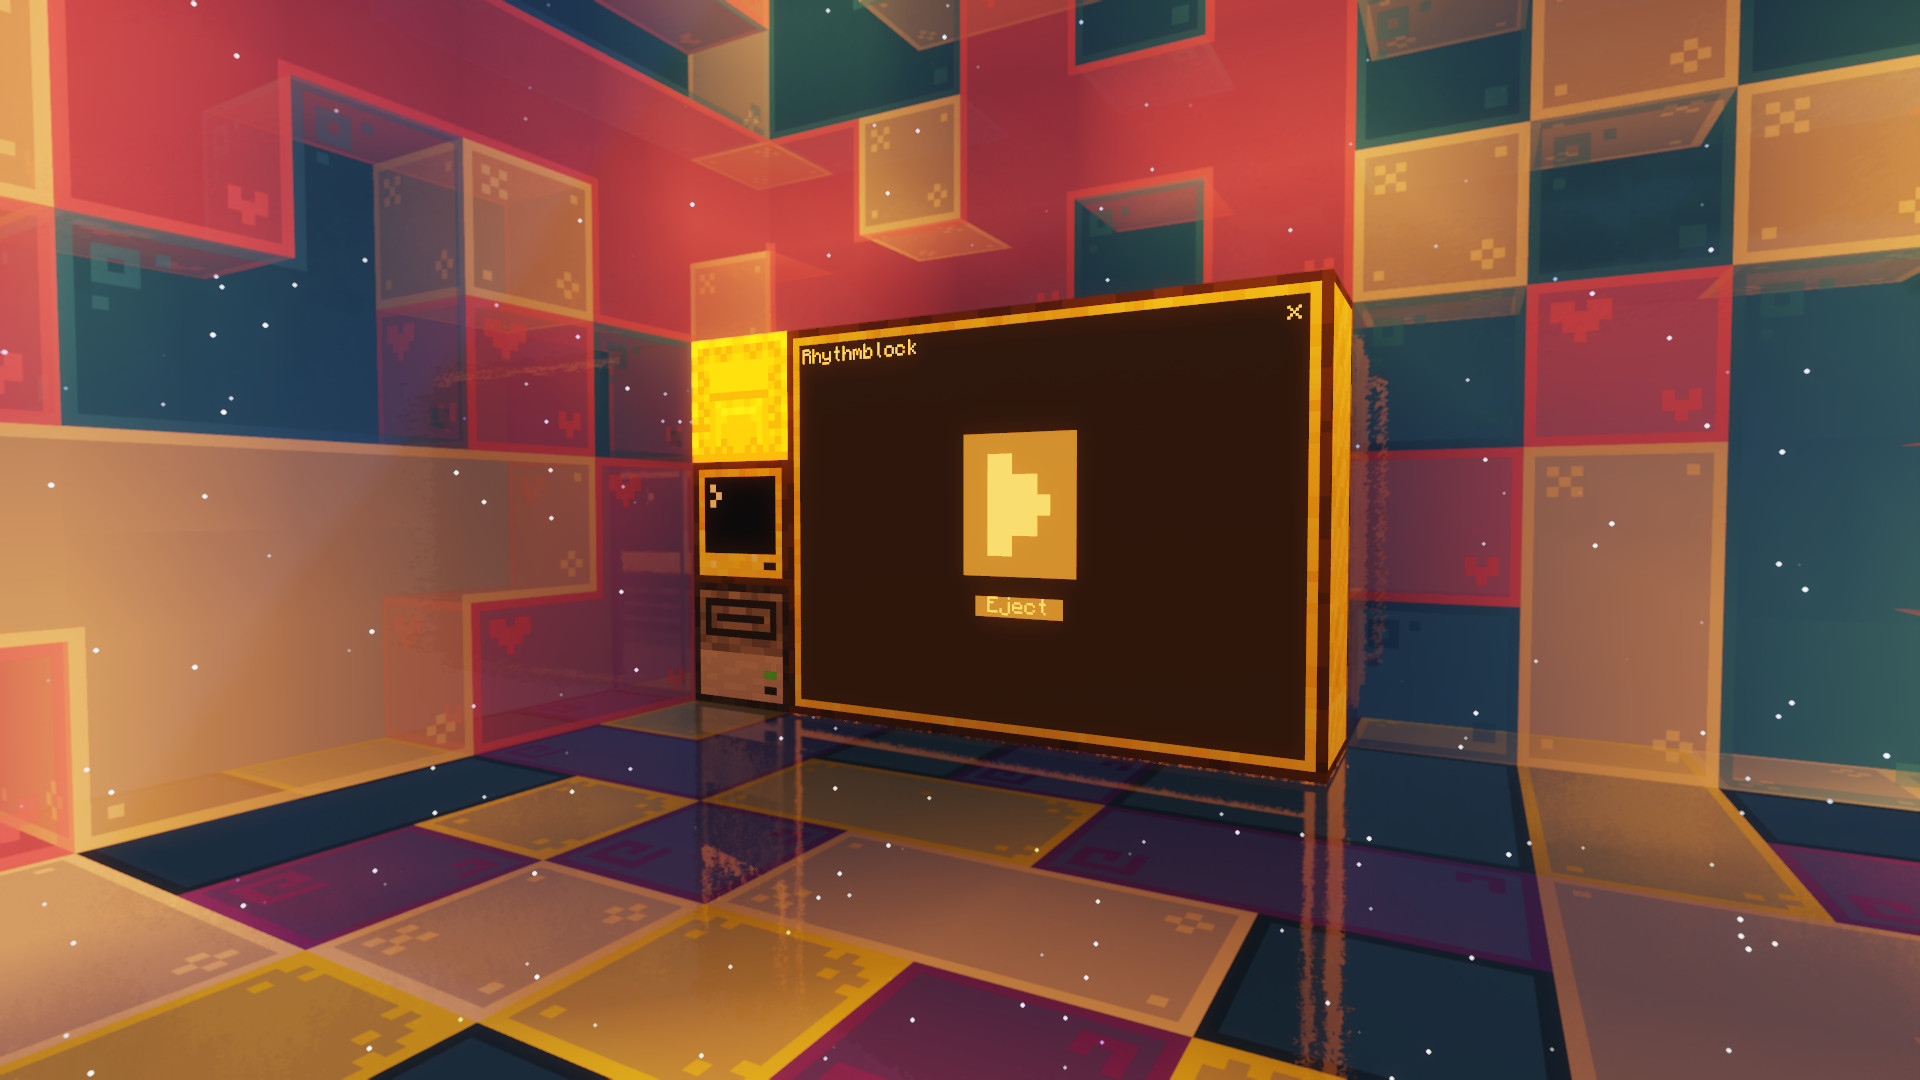 A screenshot of a Minecraft world. Depicts a glass cube with colors from both the non-binary flag and the transgender flag scattered accross tinted glass blocks. At the center of the image, a ComputerCraft computer with a monitor and disk drive attached to it. The monitor displays the interface for Rhythmblock.